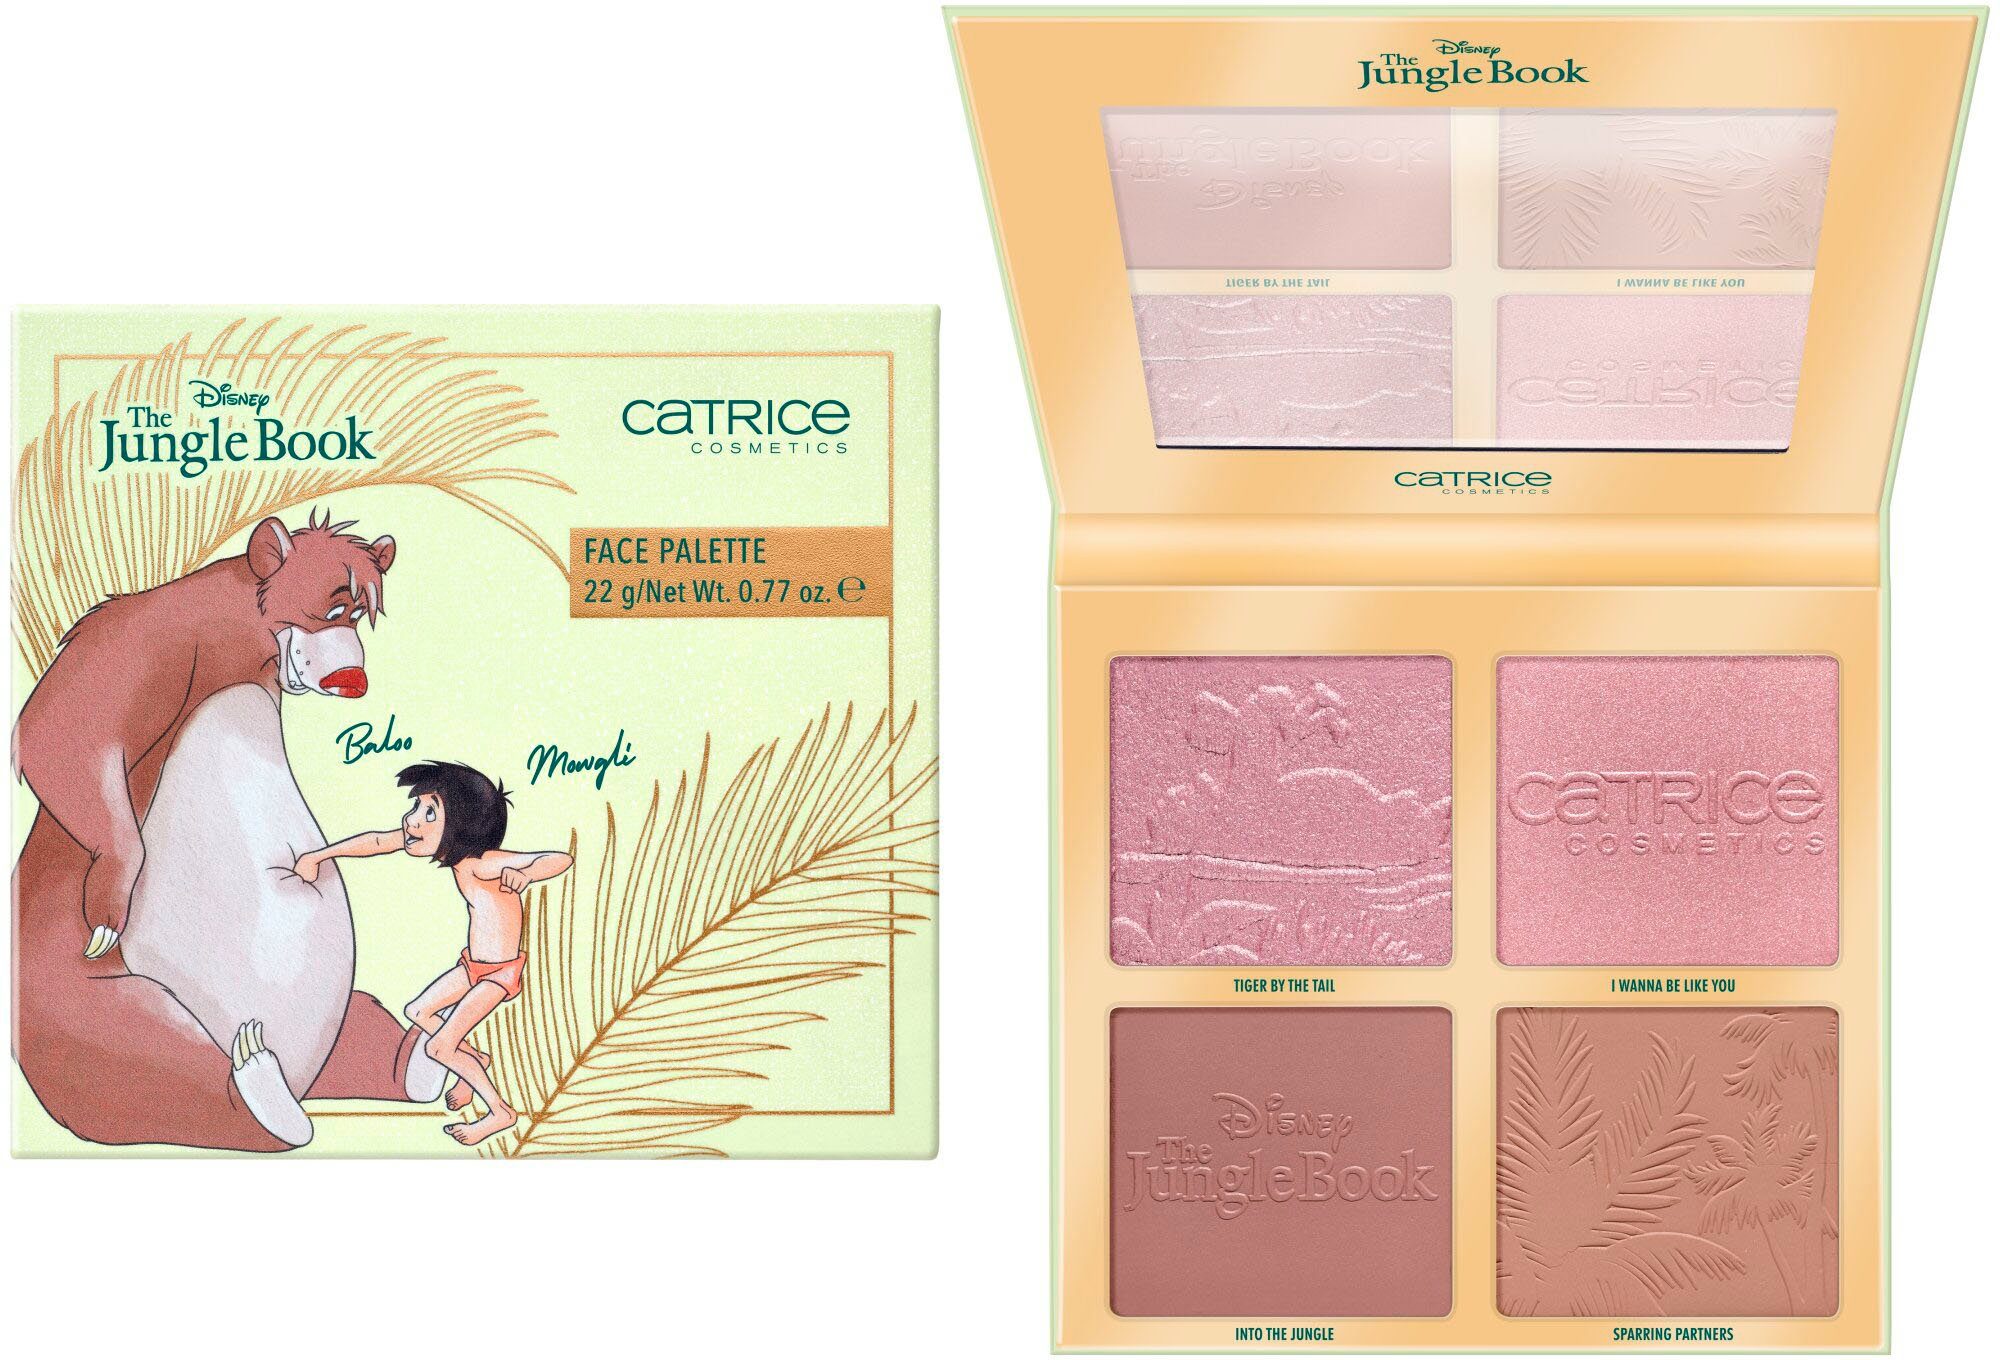 Großeinkauf Catrice Contouring-Palette Disney The Jungle Book Palette Face